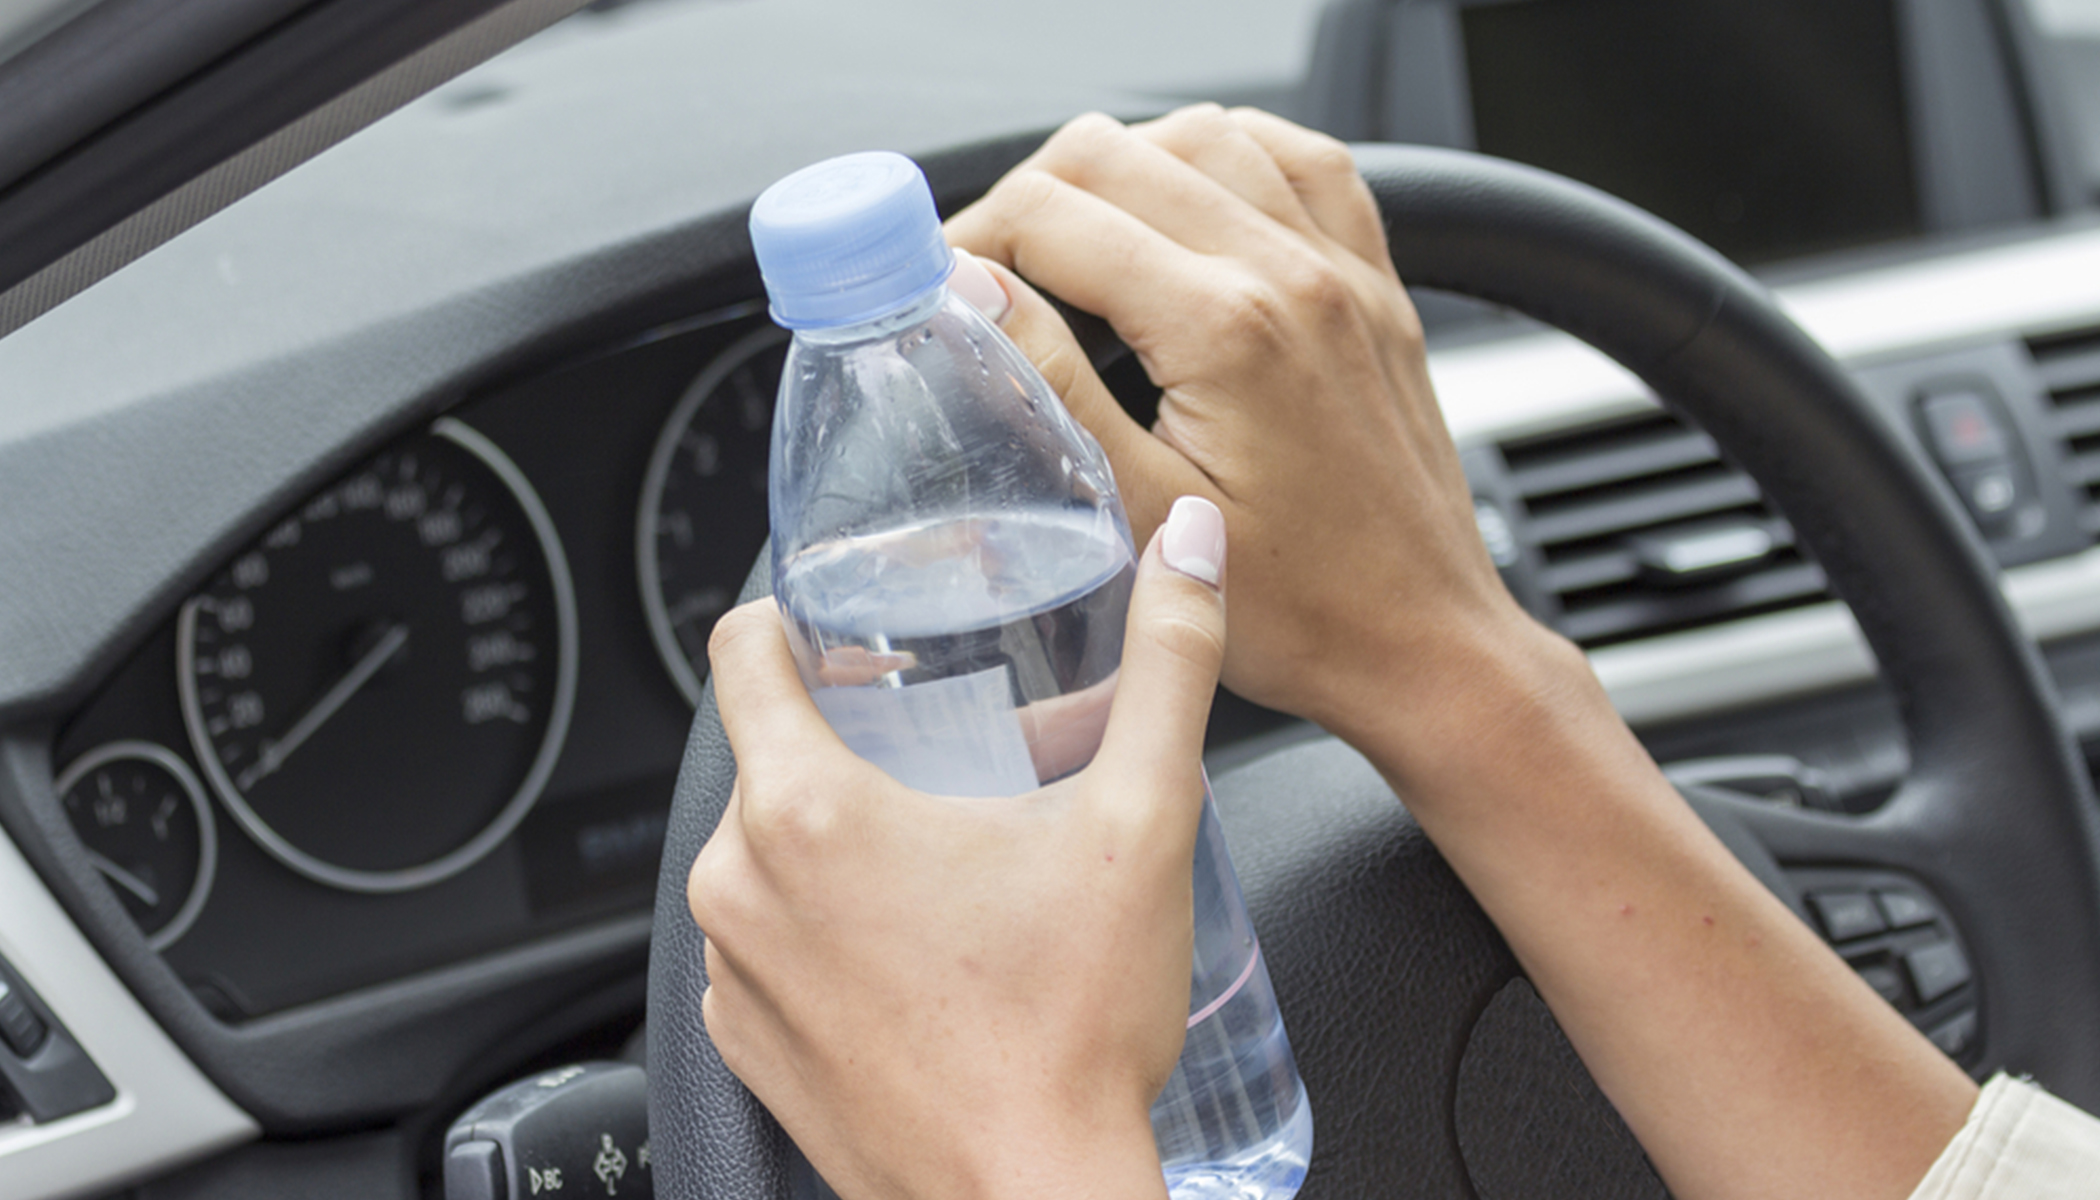 https://img.theepochtimes.com/assets/uploads/2020/05/21/Water-Bottle-in-Car-i-1a.jpg